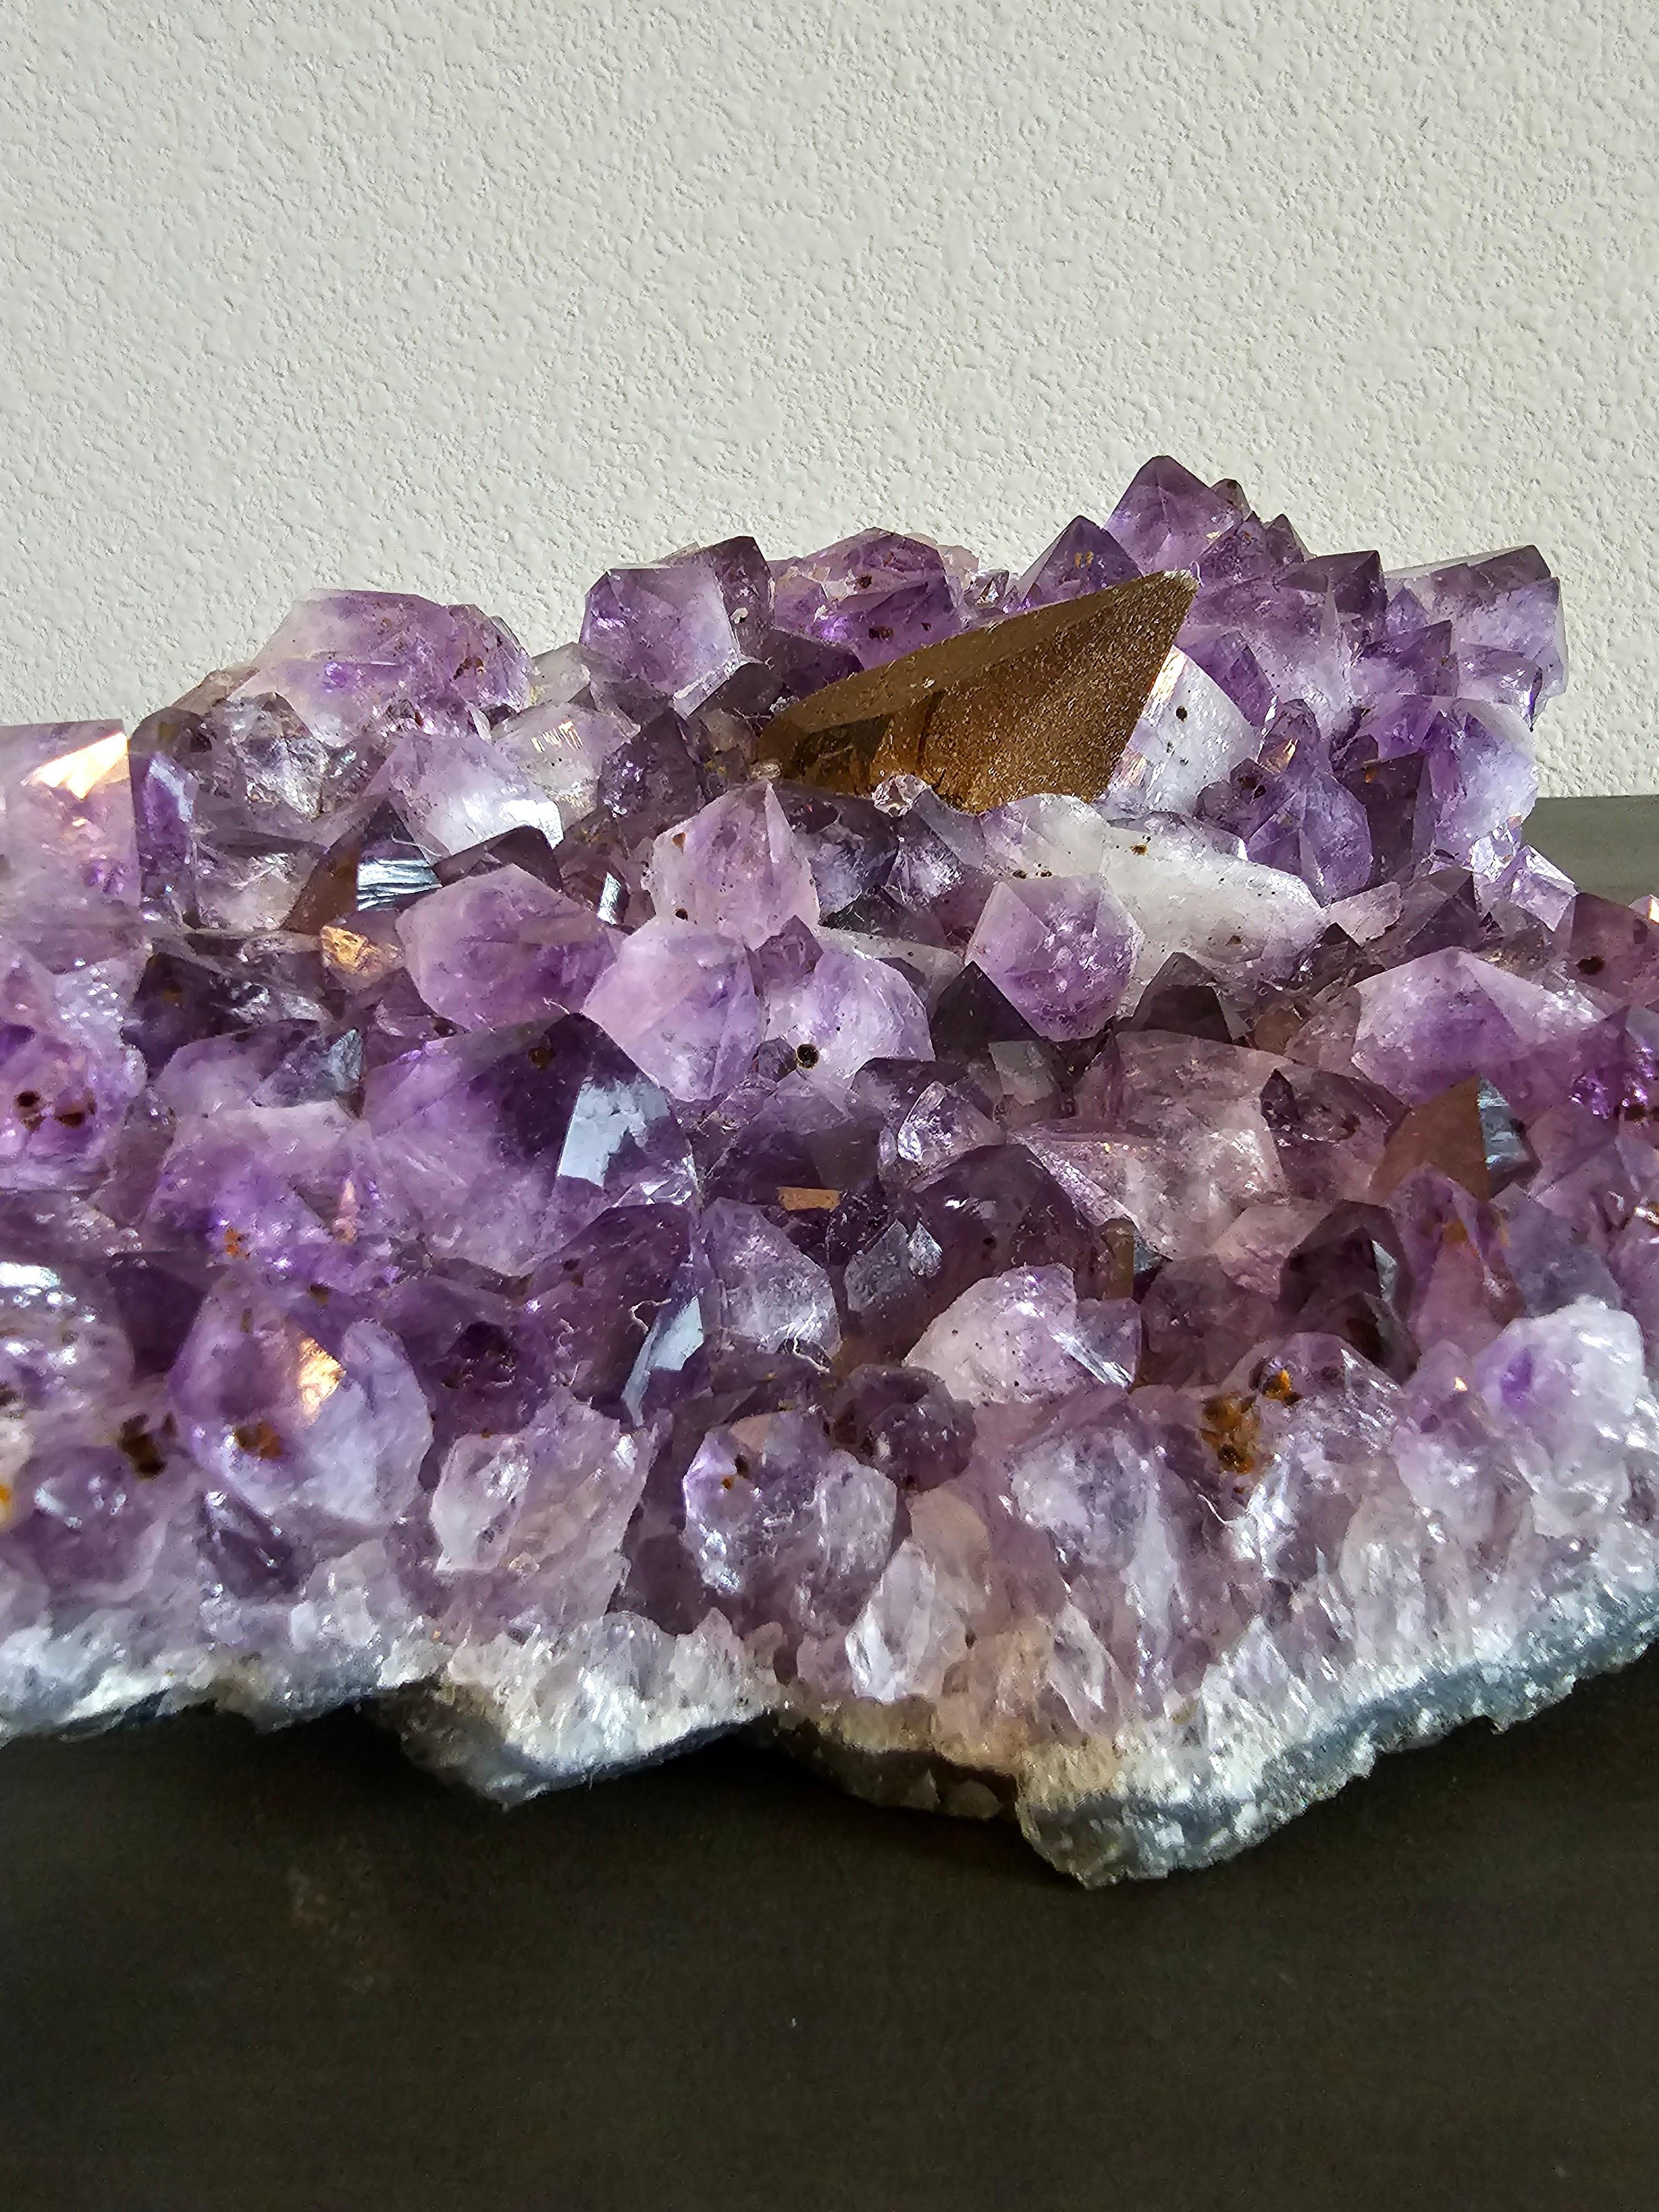 A large brilliant natural amethyst specimen that displays large crystal terminations, rich inclusions and calcite formations throughout, and a single large hematite spike.

Dimensions: (approx)
11.5